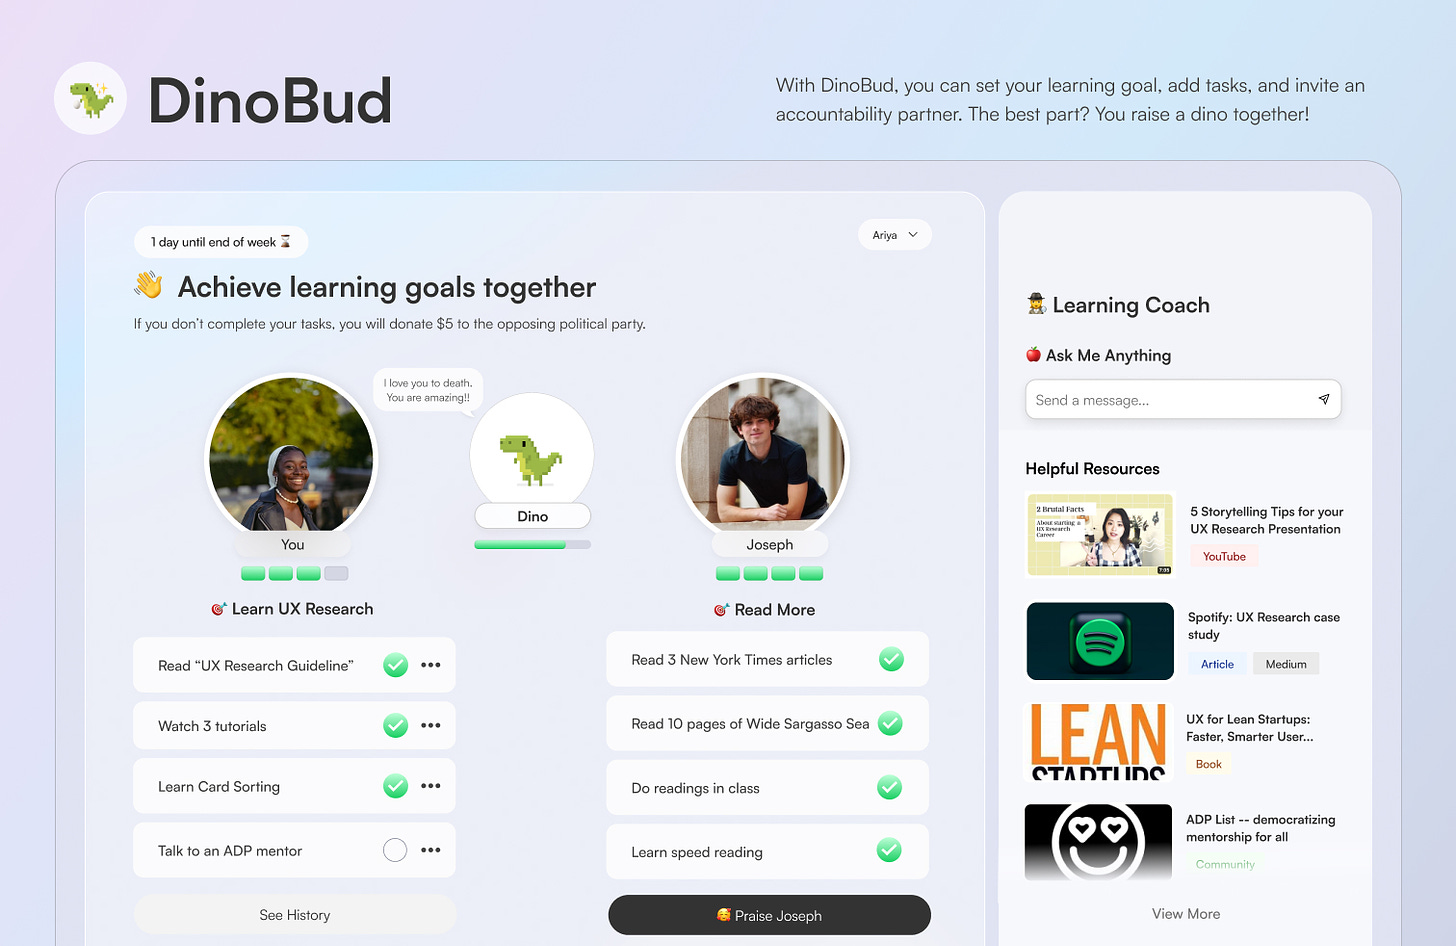 Graphic for DinoBud - an partner accountability system to help you learn